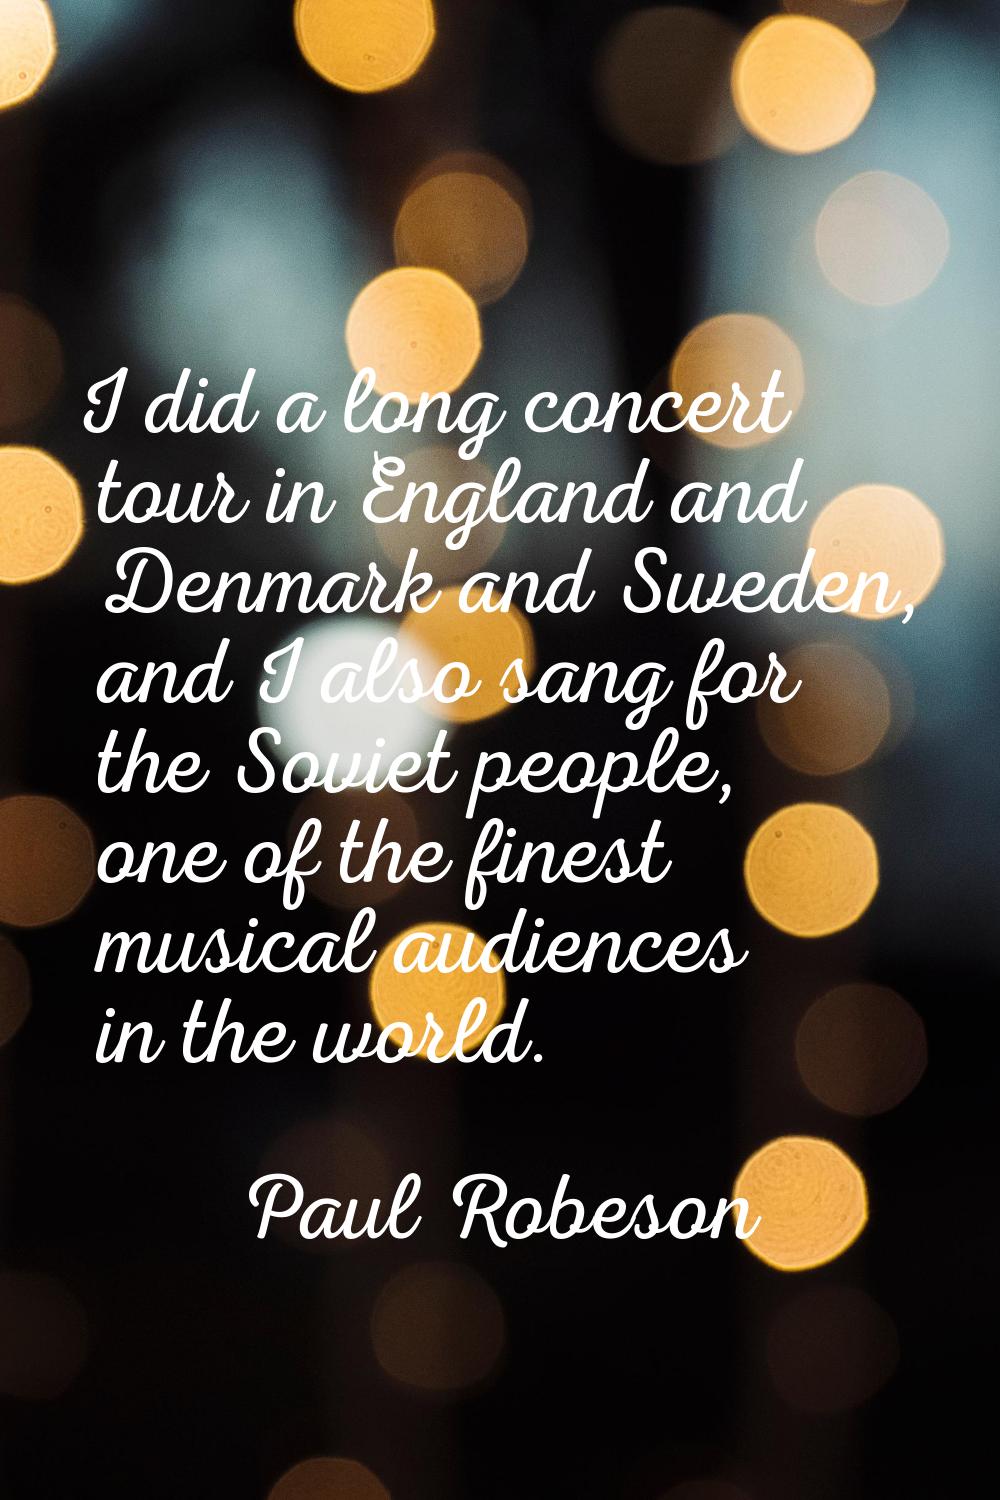 I did a long concert tour in England and Denmark and Sweden, and I also sang for the Soviet people,